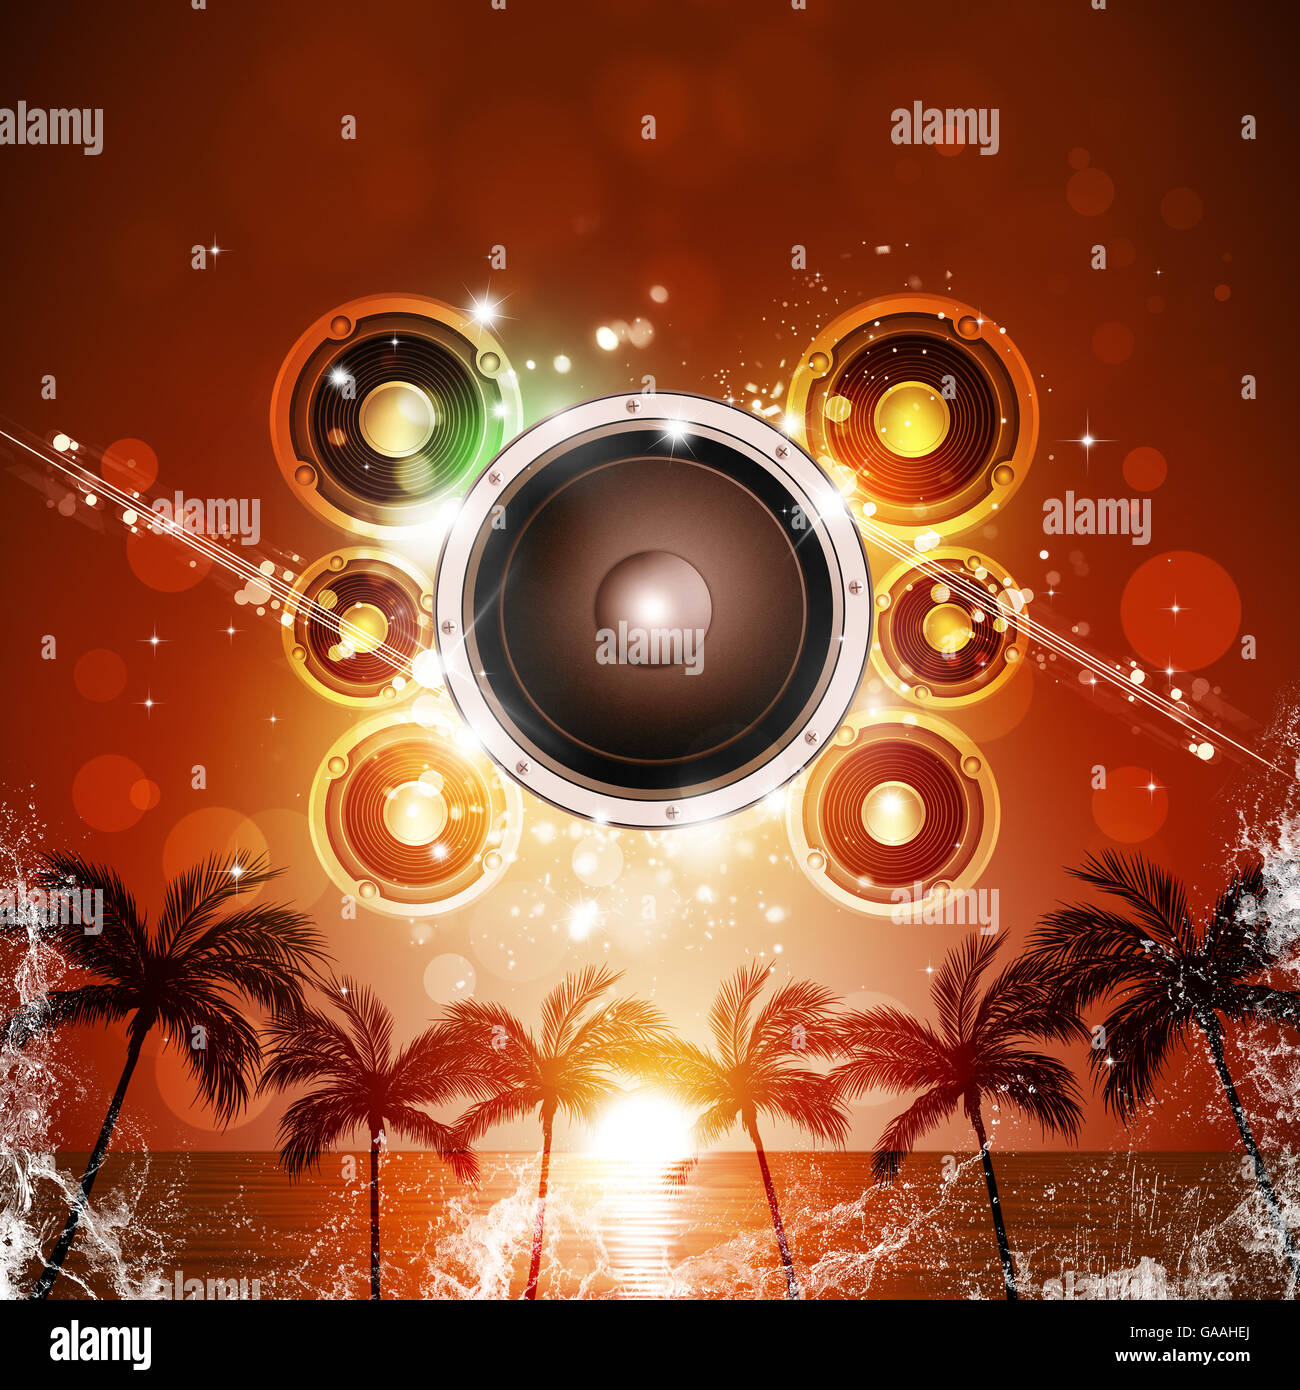 summer party music poster with palms and sound speaker Stock Photo